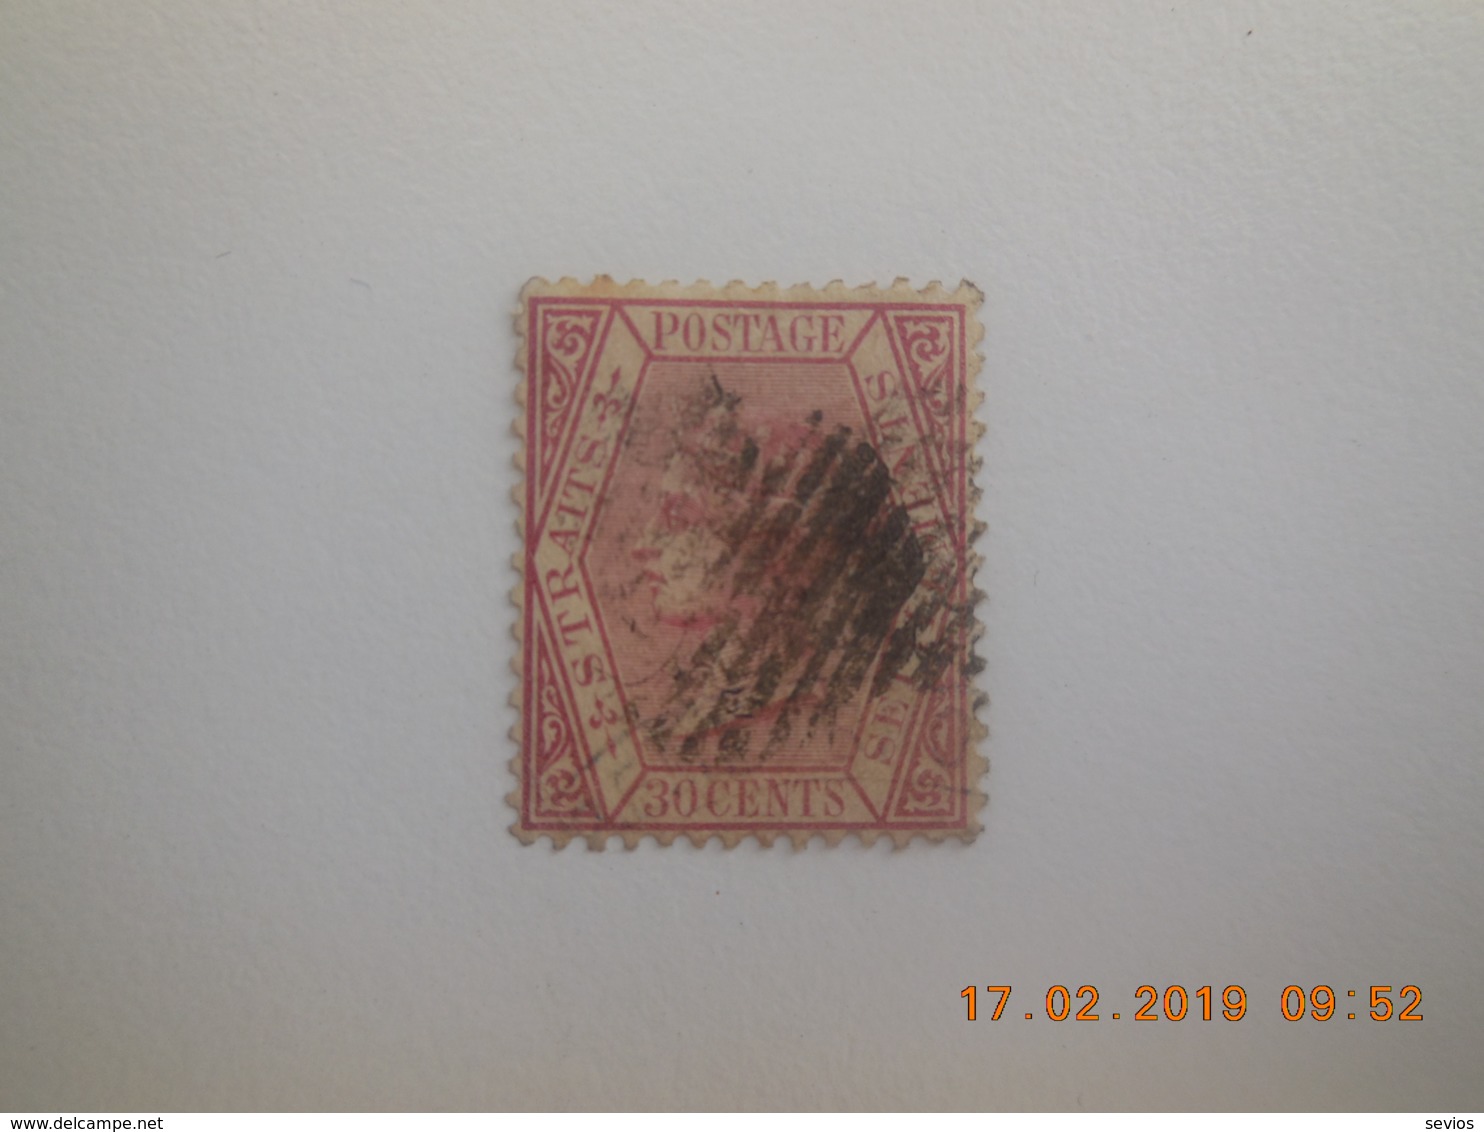 Sevios / Groot Brittannie / **, *, (*) Or Used - Straits Settlements